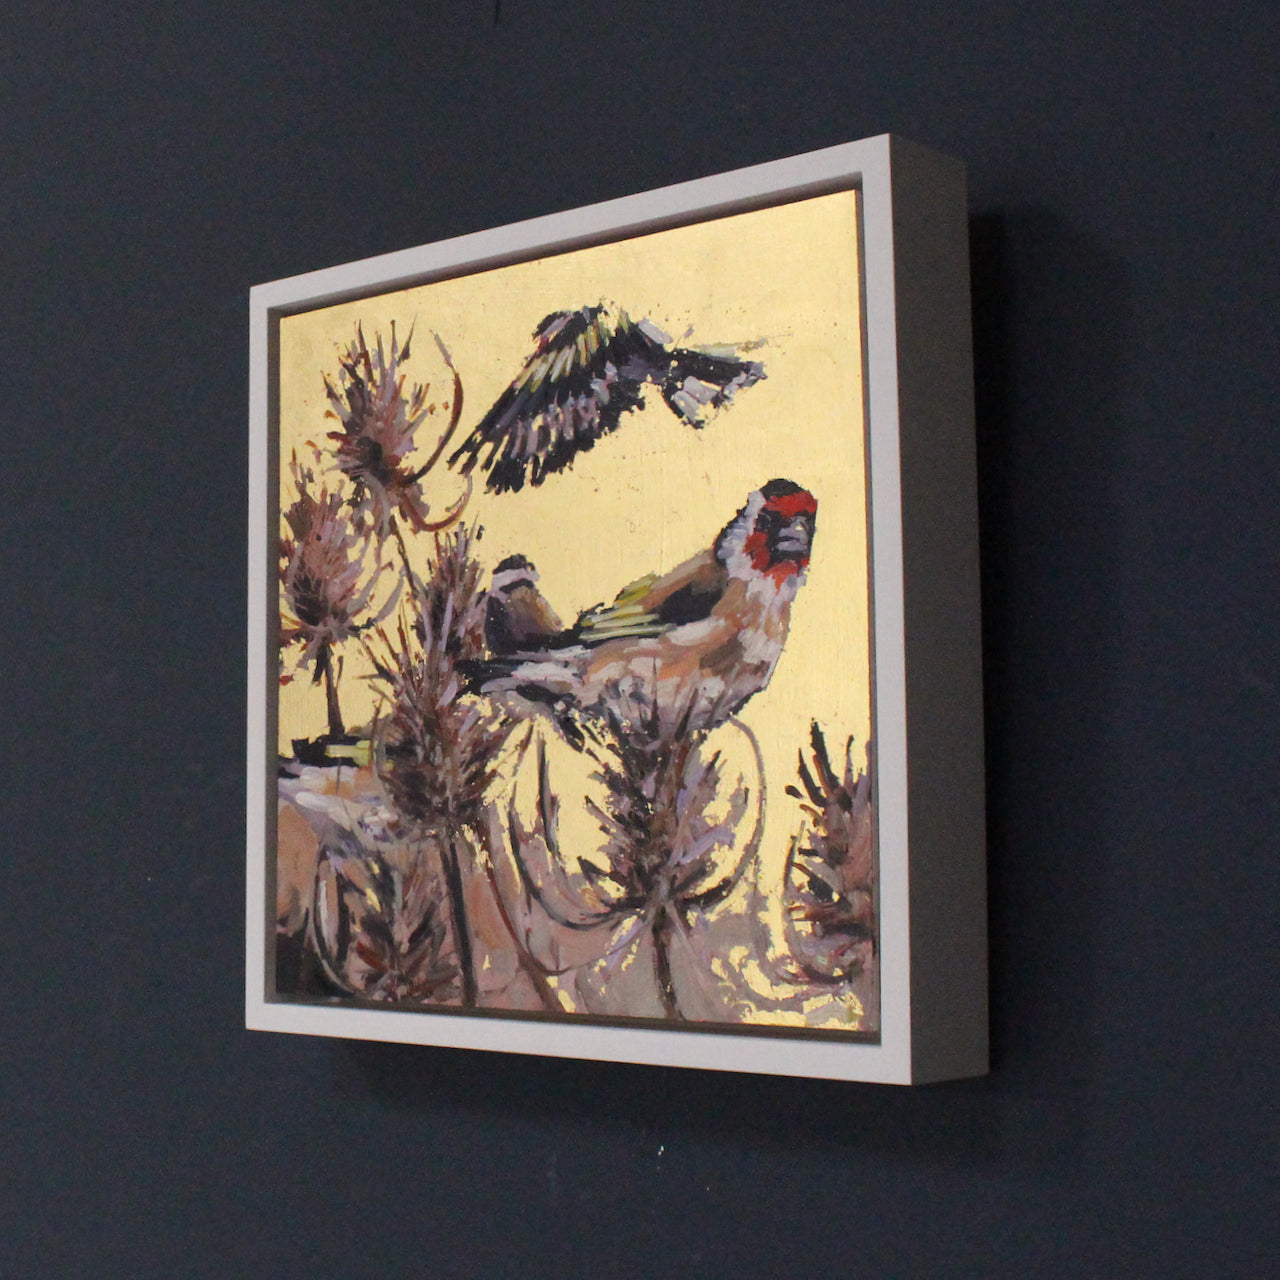 Framed gold lustre square painting with three goldfinch birds and thistles by artist Jill Hudson.